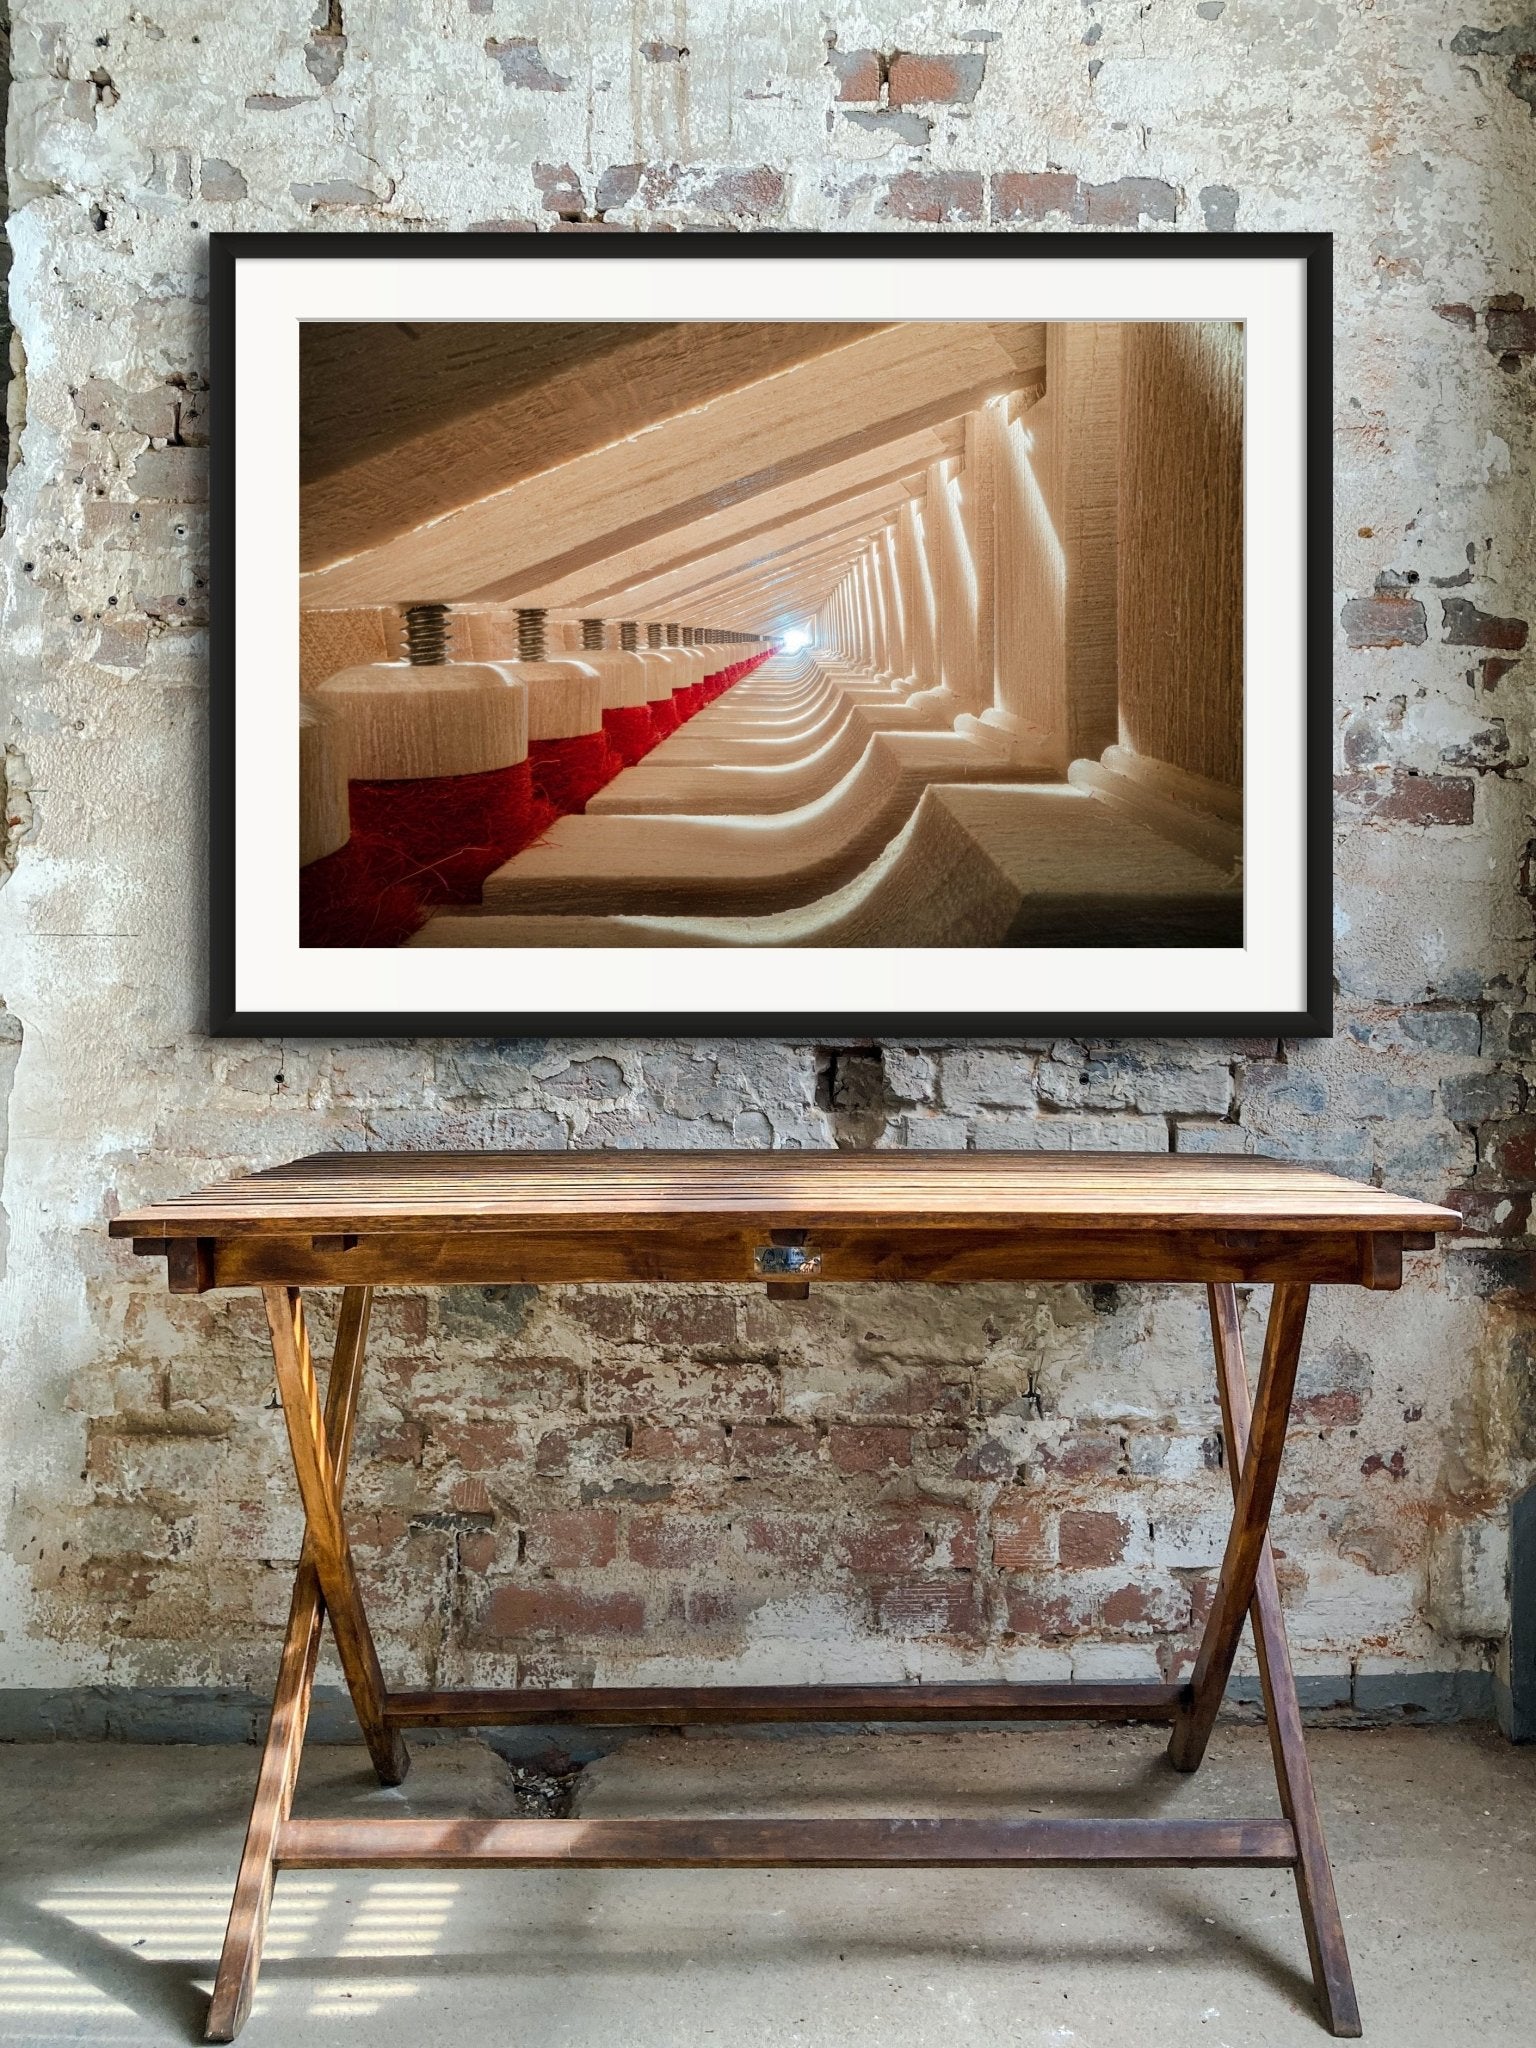 Photo of Fazioli Grand Piano Part 1. Framed & Signed Limited Edition Museum Quality Print. - Giclée - Architecture In Music